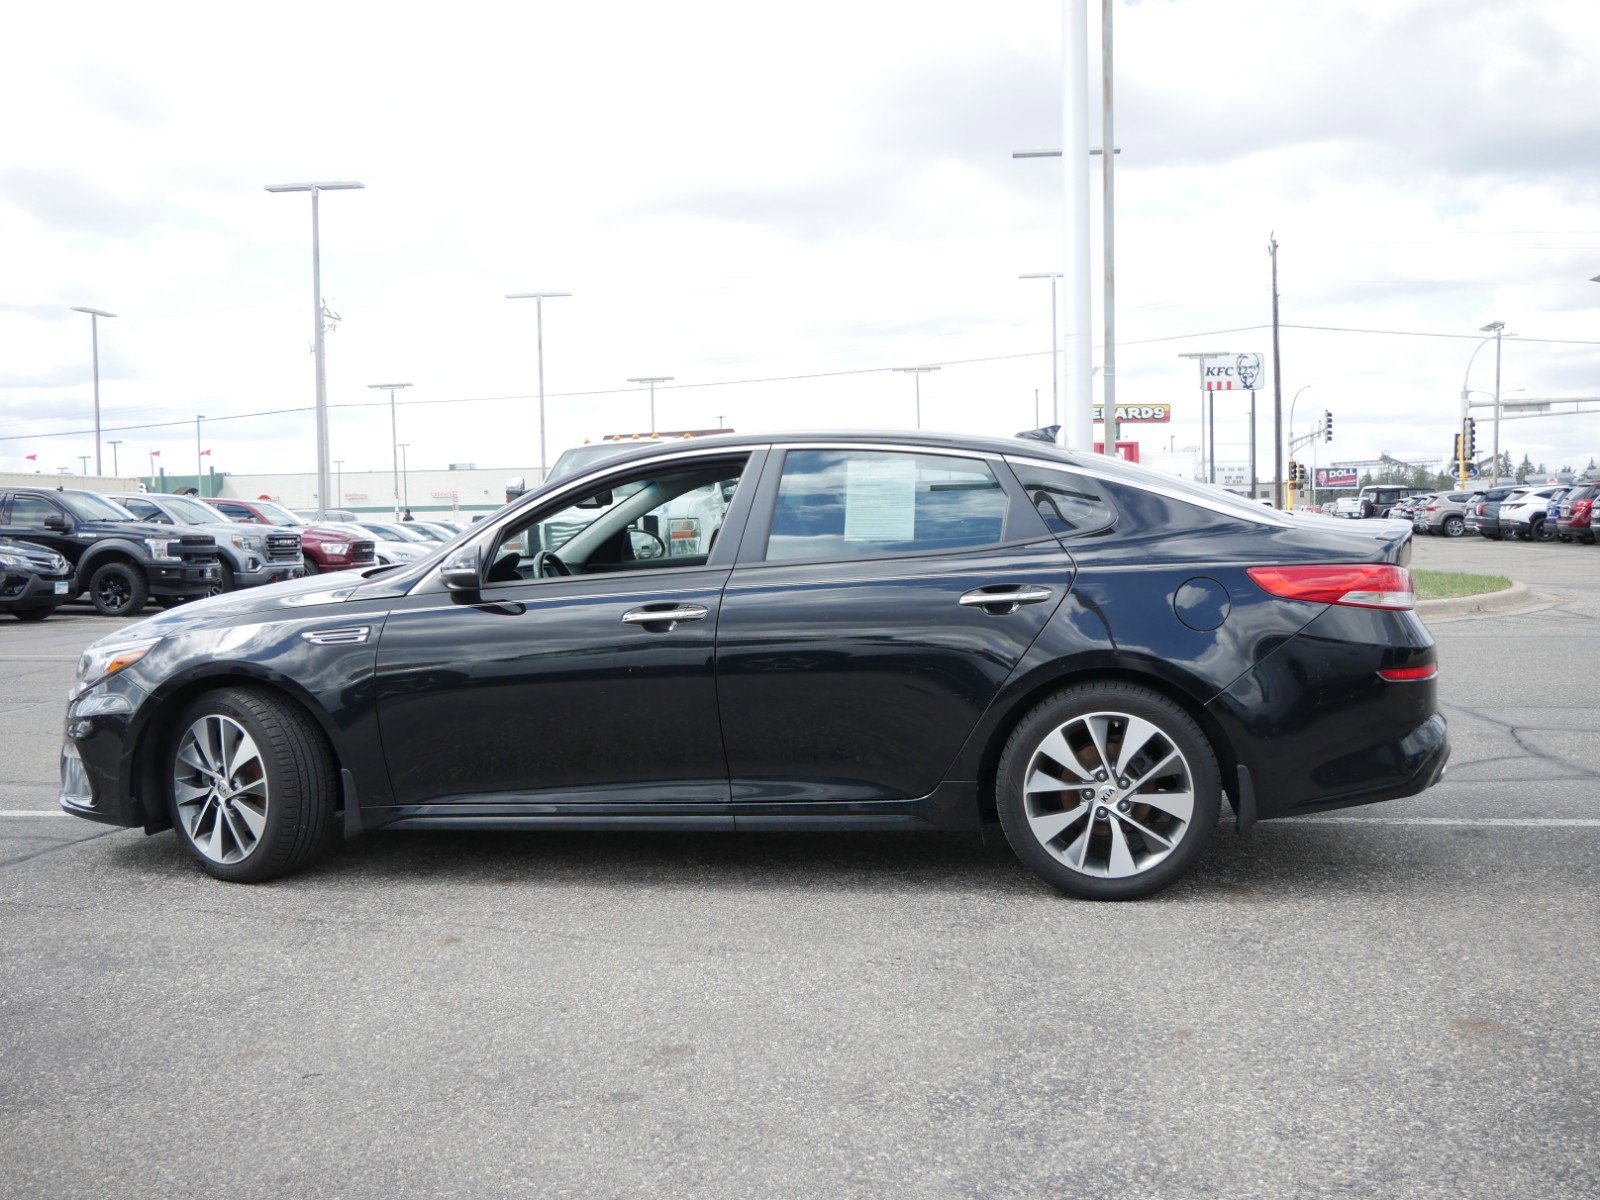 Used 2019 Kia Optima S with VIN 5XXGT4L39KG296382 for sale in Waite Park, Minnesota